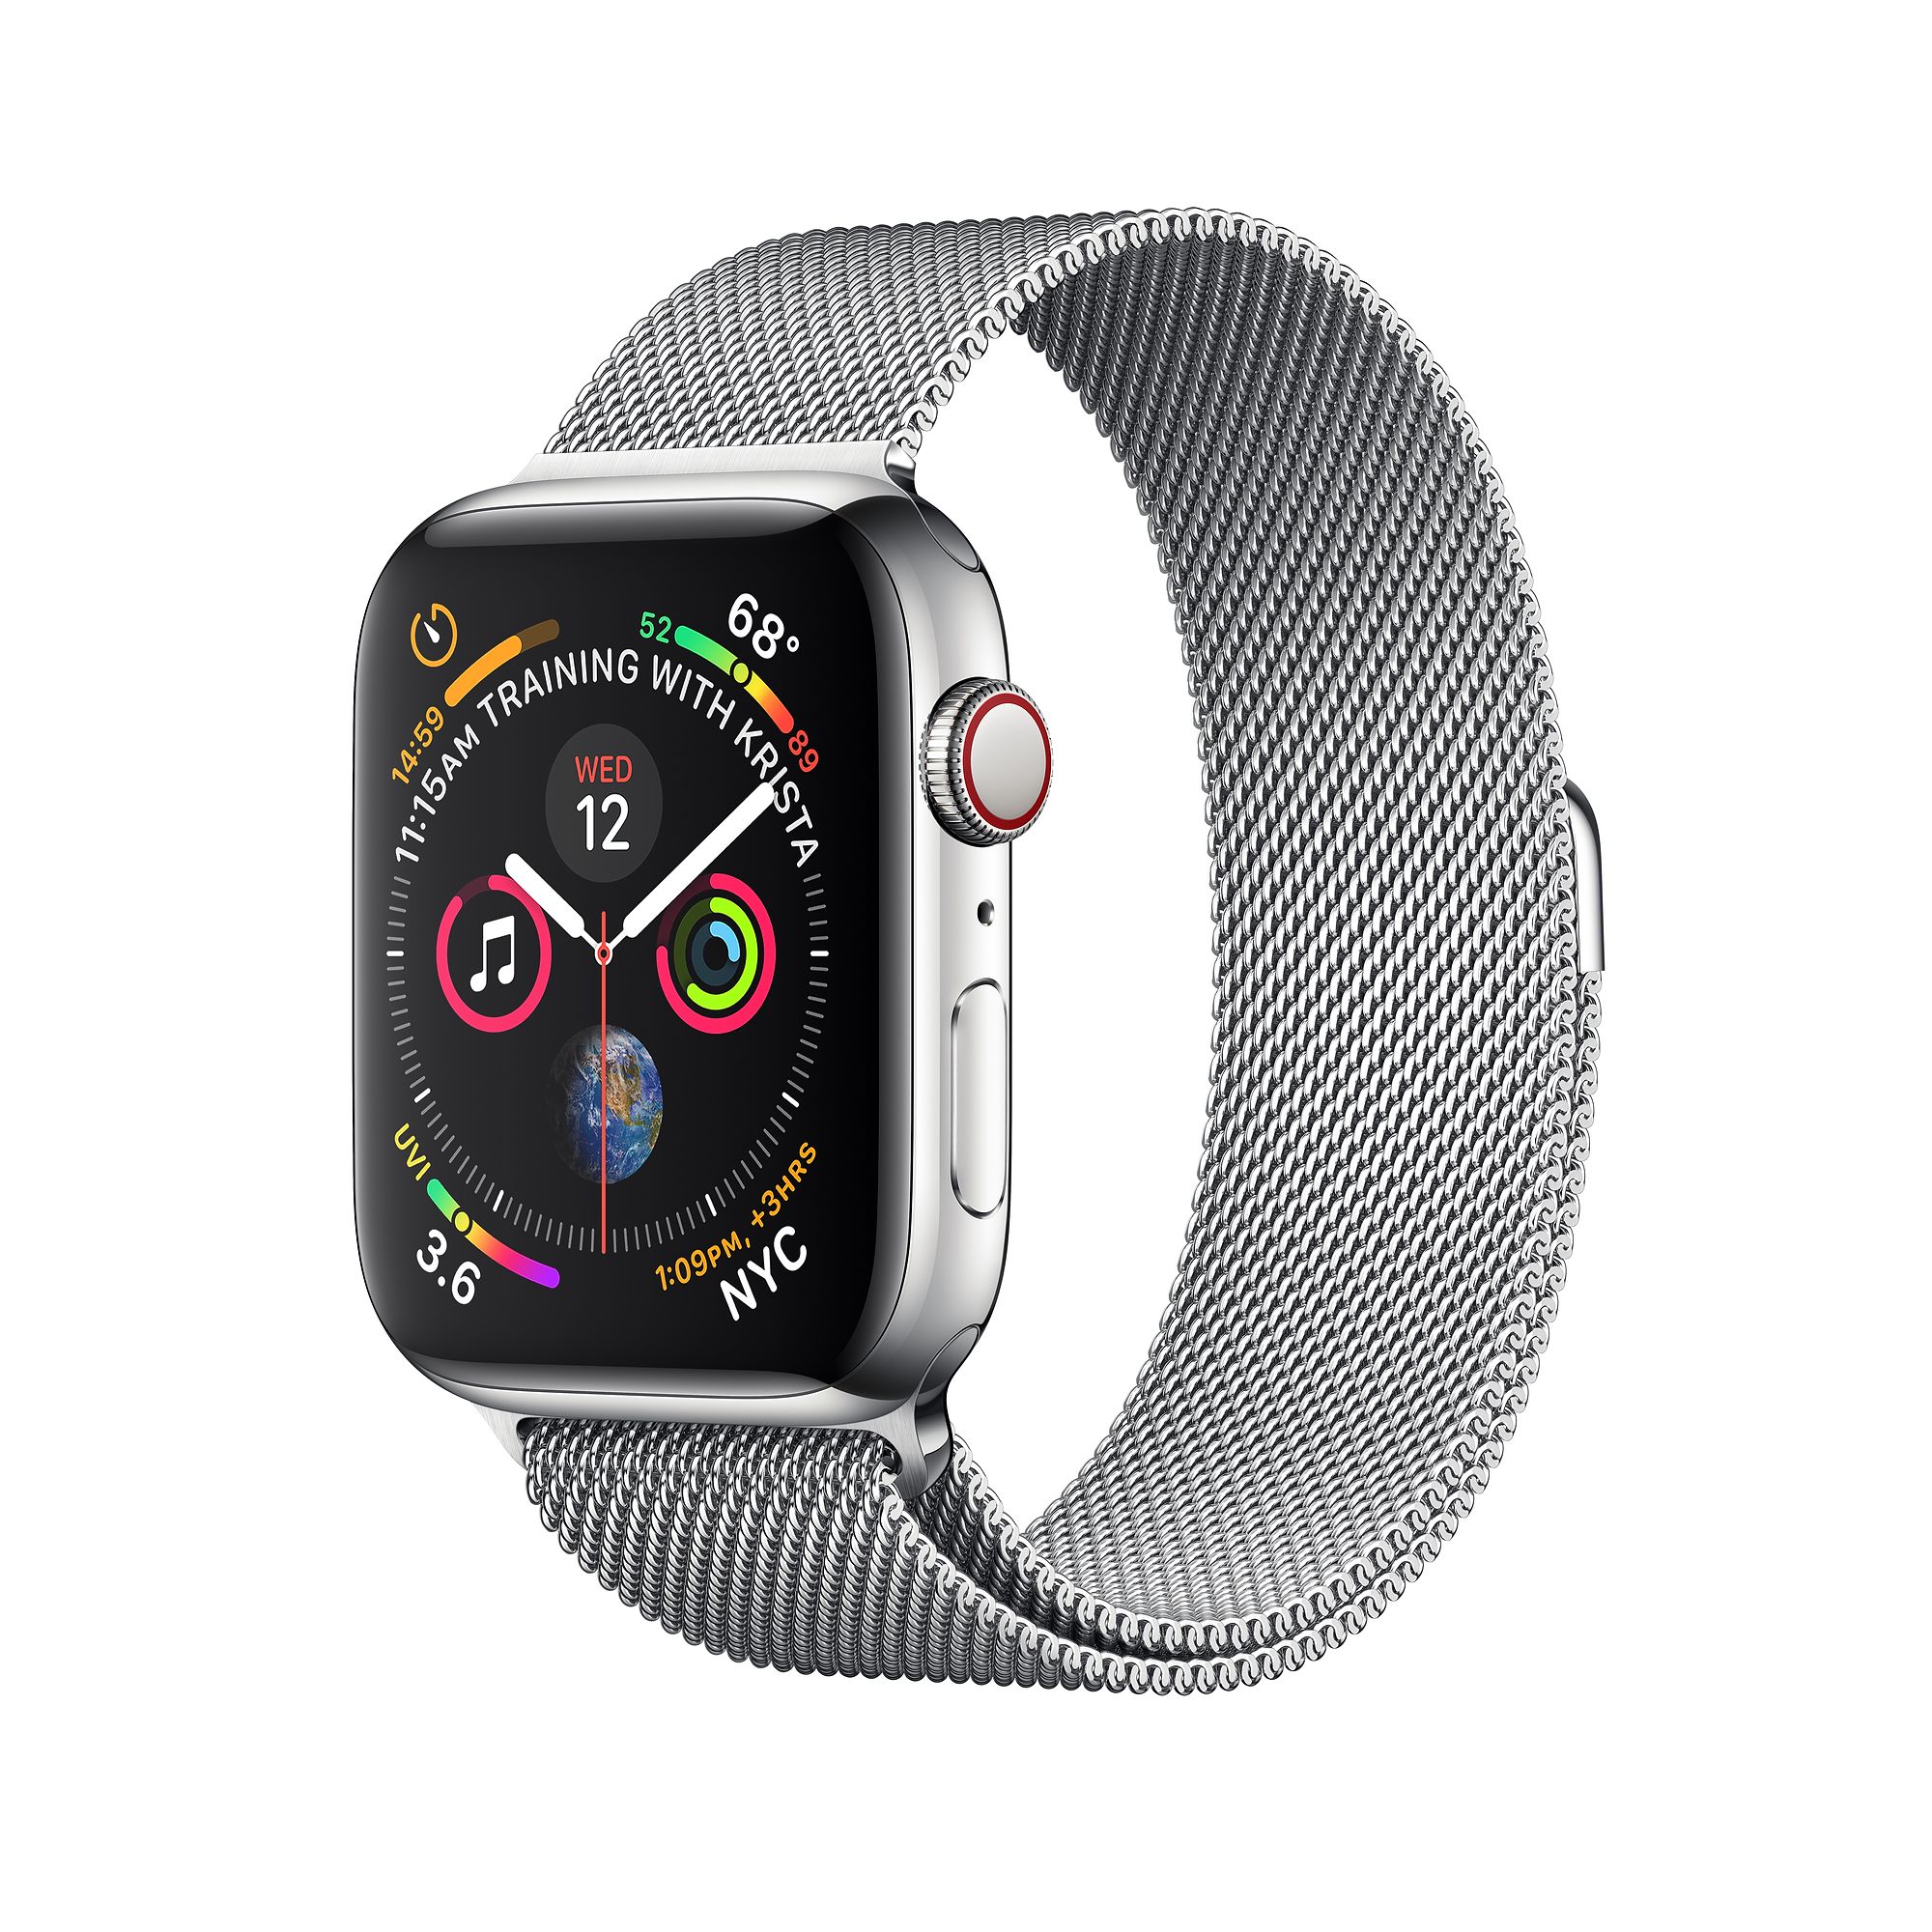 Apple Watch Series 4 - 40mm - Stainless Steel (LTE)  Chưa Active - 9.090.000 